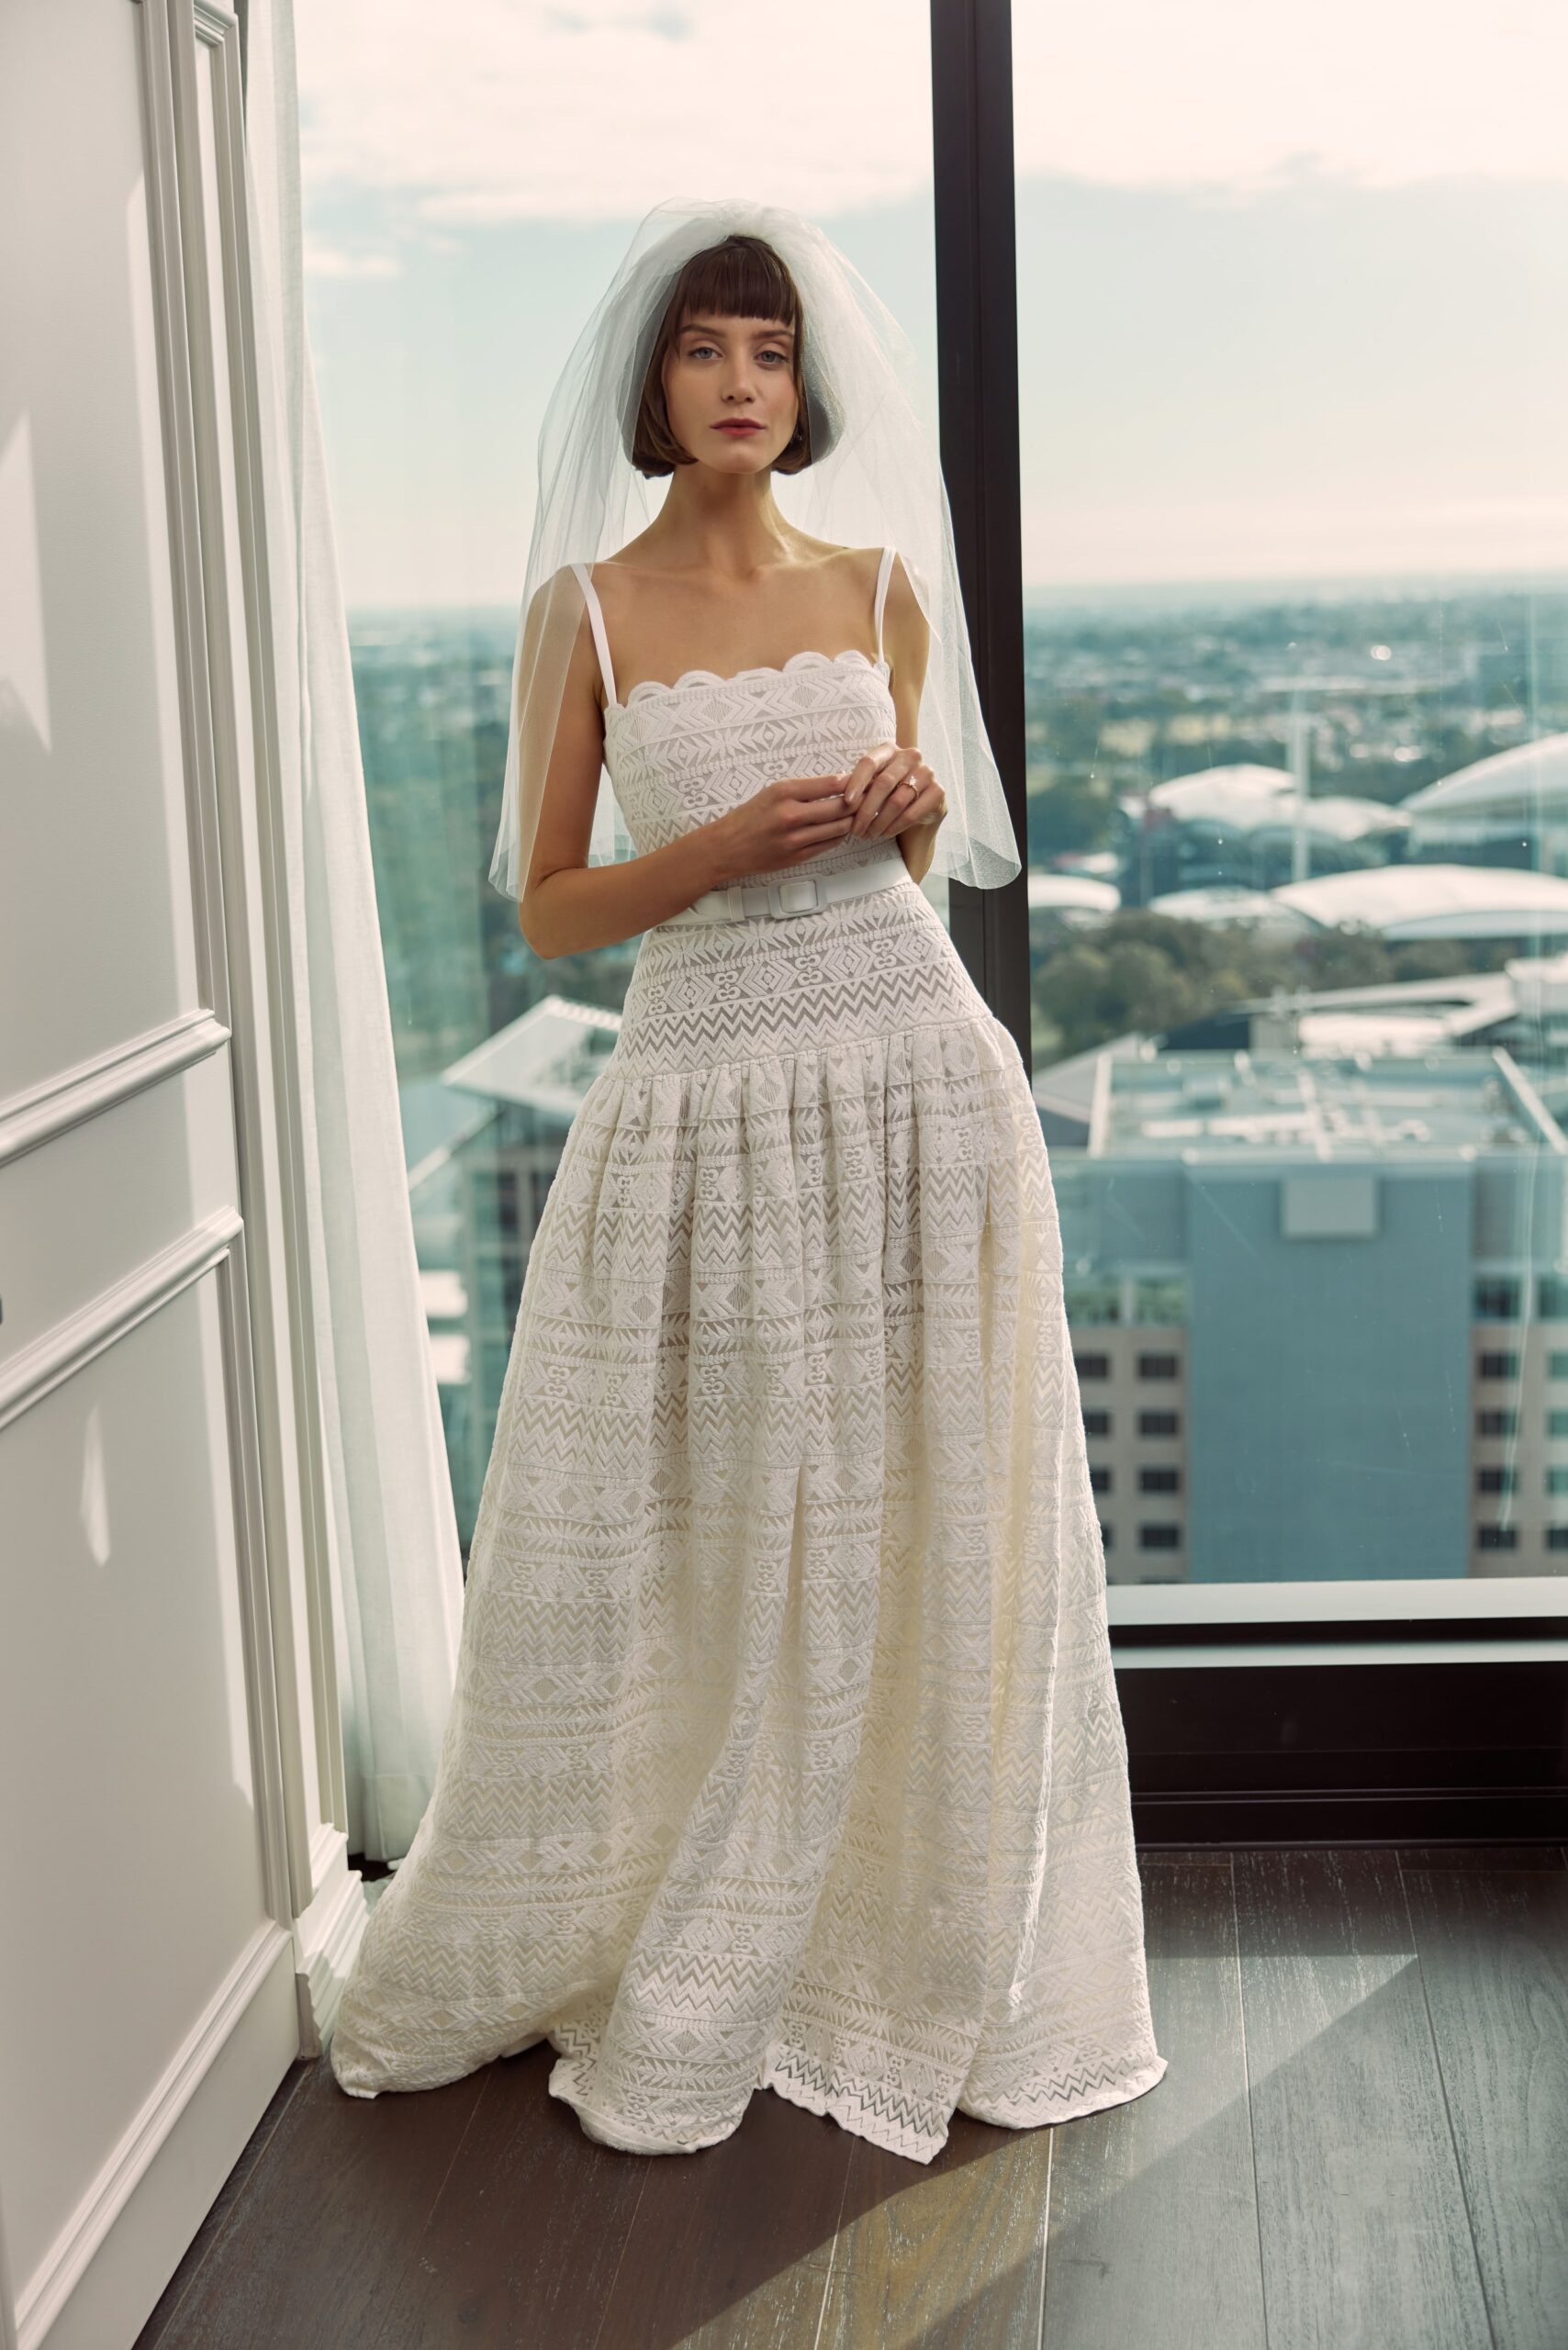 Lucille - An embroidered cotton gown with a drop waist, thin straps, belt and leg split.